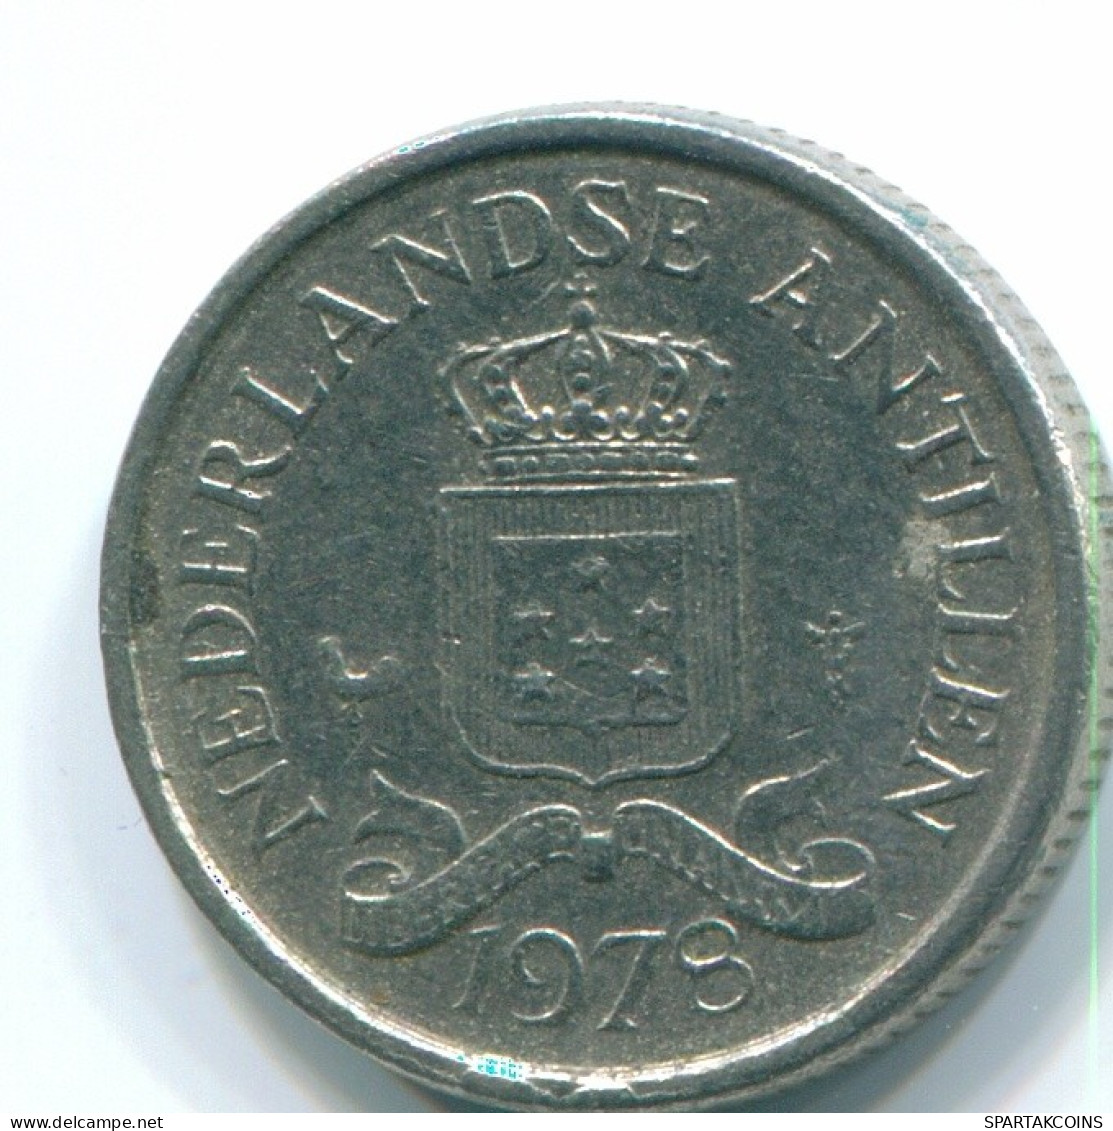 10 CENTS 1978 NETHERLANDS ANTILLES Nickel Colonial Coin #S13581.U.A - Netherlands Antilles